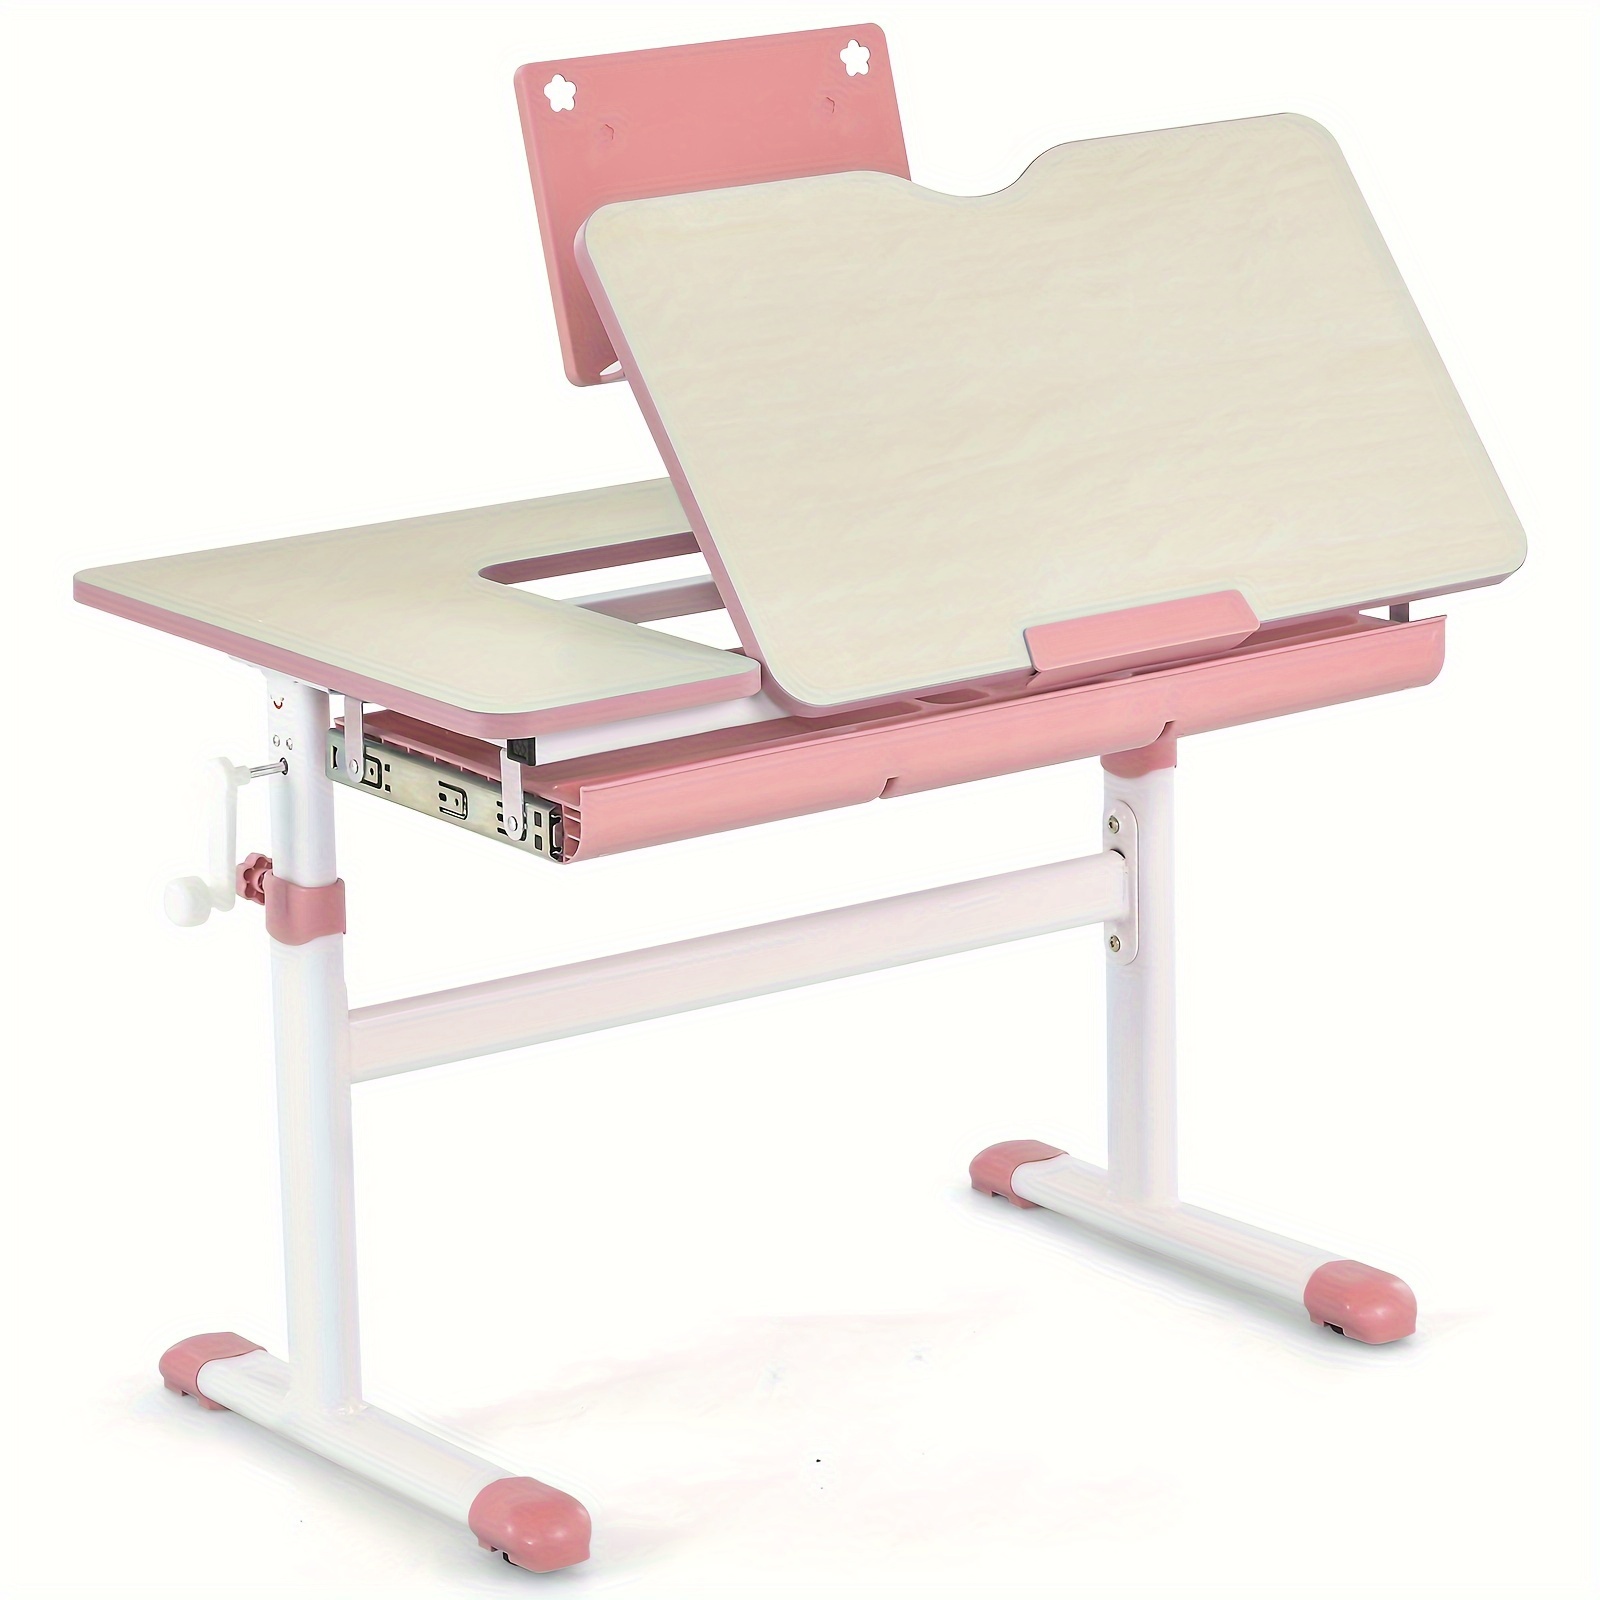 

1pc Adjustable Kids Study Desk, Classic Style With Metal And Plastic Materials, Tilt Desktop And Book Stand, Ergonomic Children's Table, 32"x20.5" Surface, Easy-to-clean, Pink & White